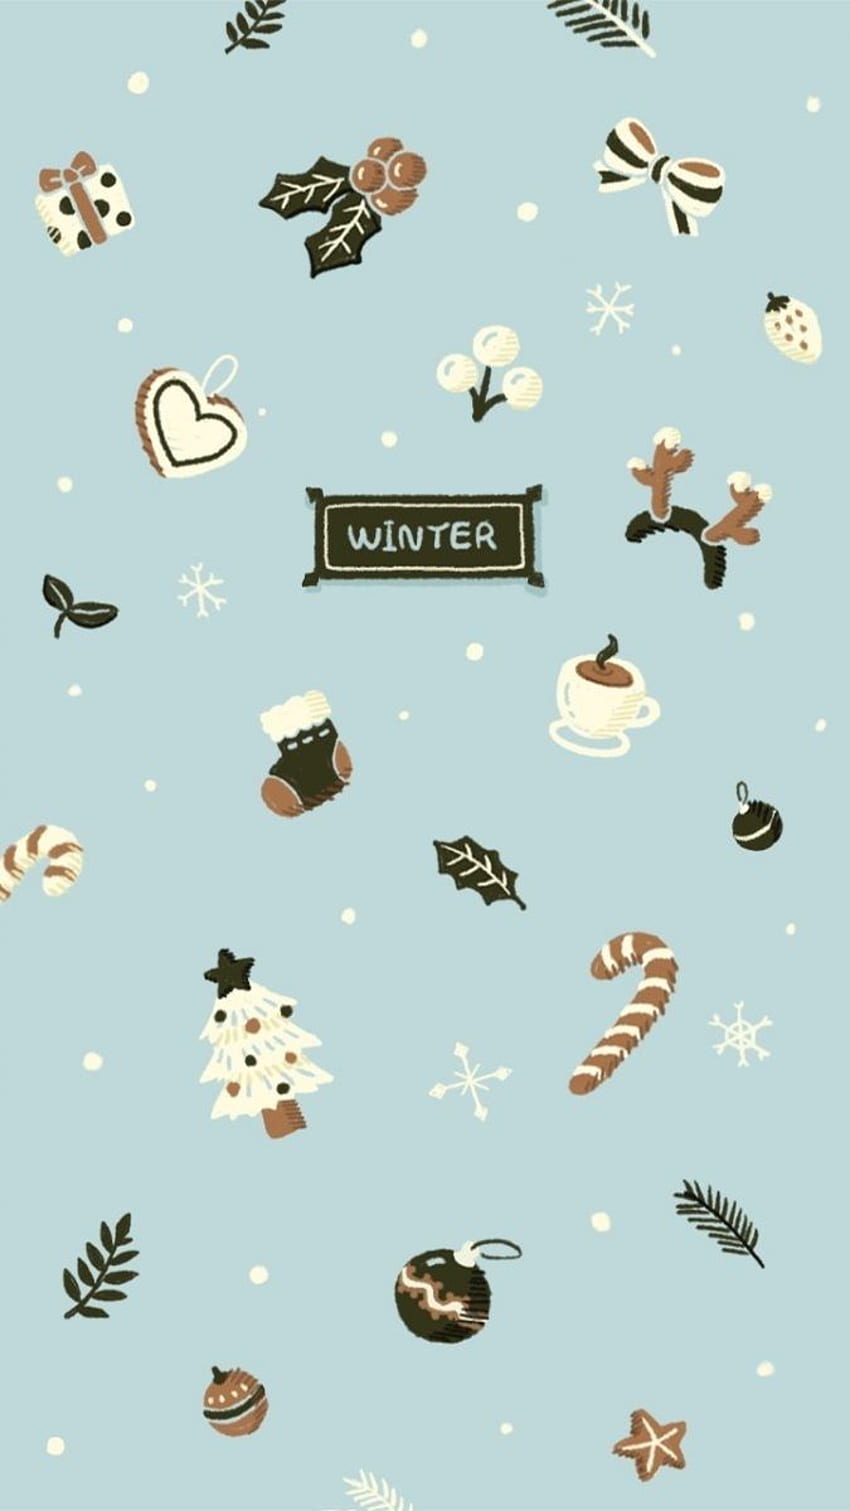 Free Illustrative January Wallpapers on Behance